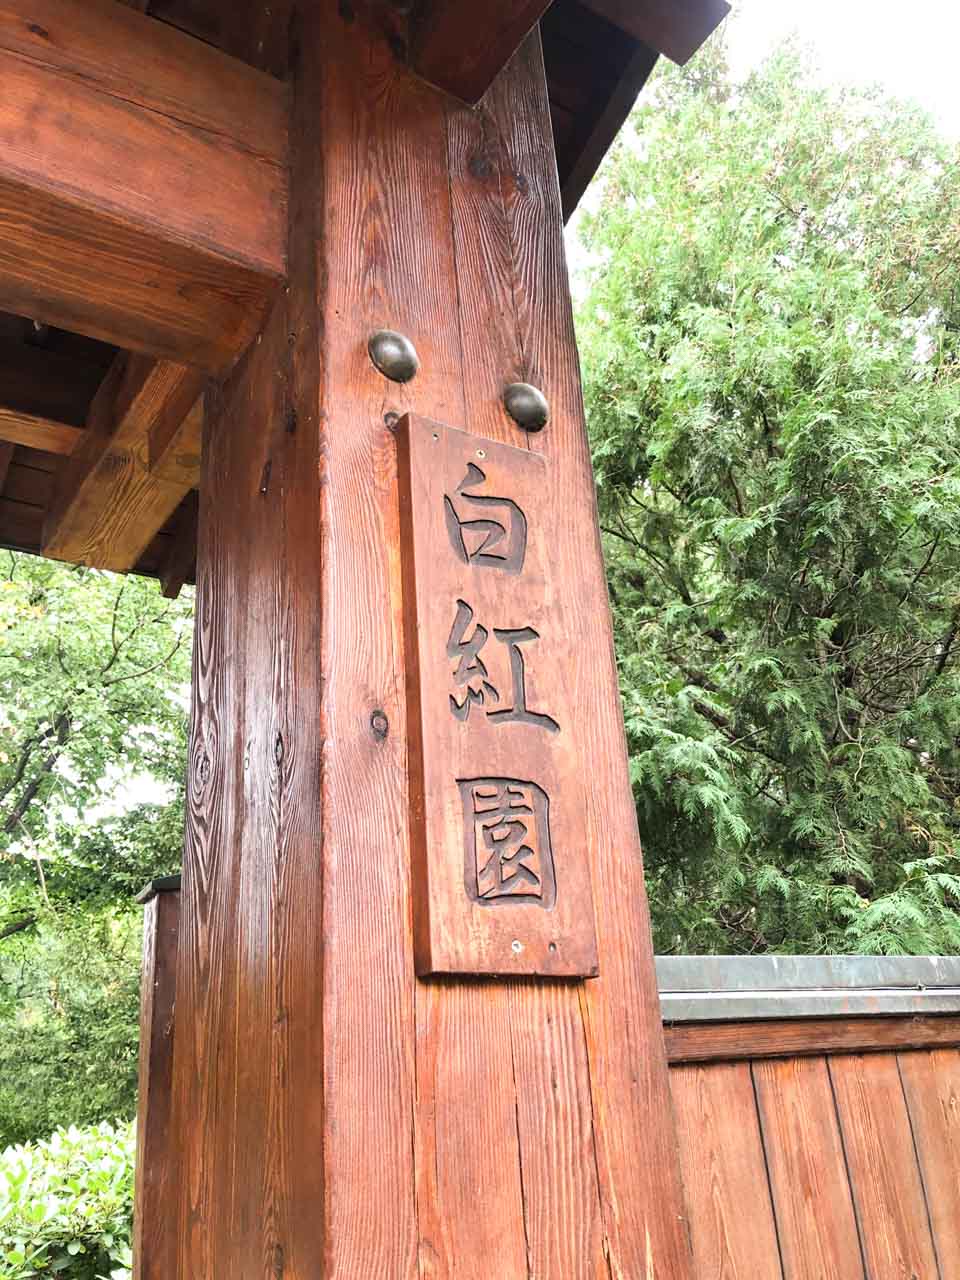 Japanese characters carved on the entrance gate to the Japanese Garden in Wrocław